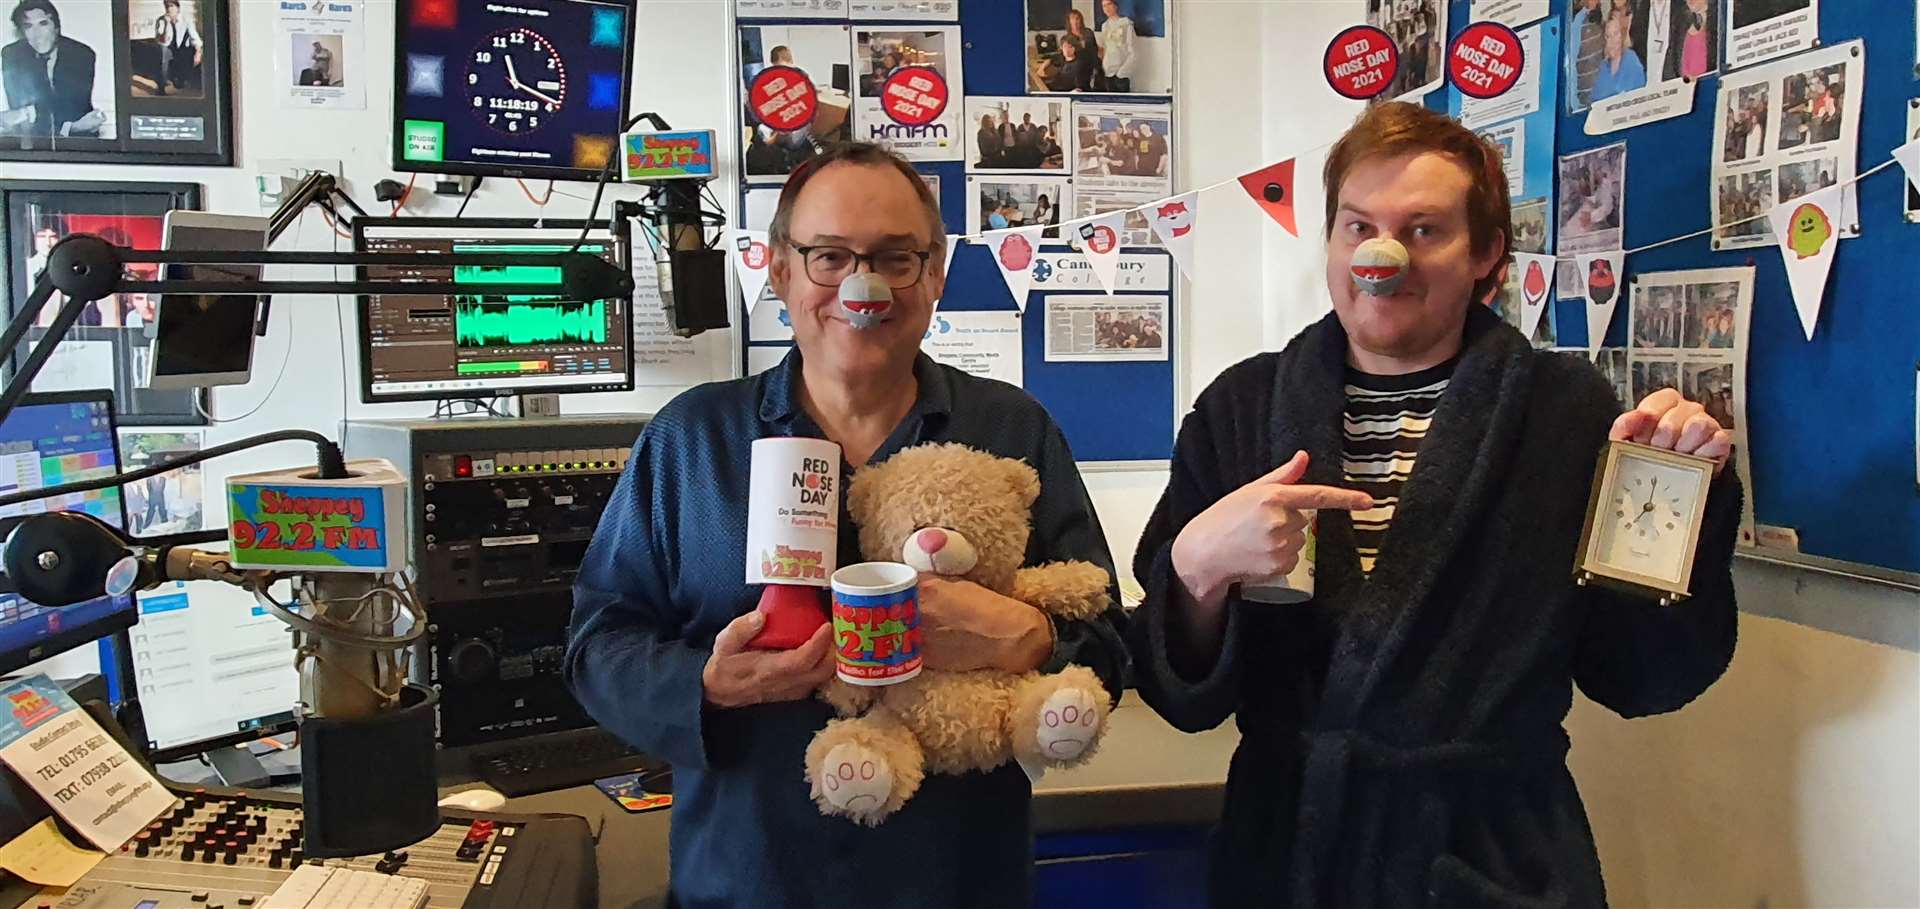 Sheppey FM presenters Russell Cashman, left, and Chris Thomas are taking part in a 24-hour radio marathon for Red Nose Day